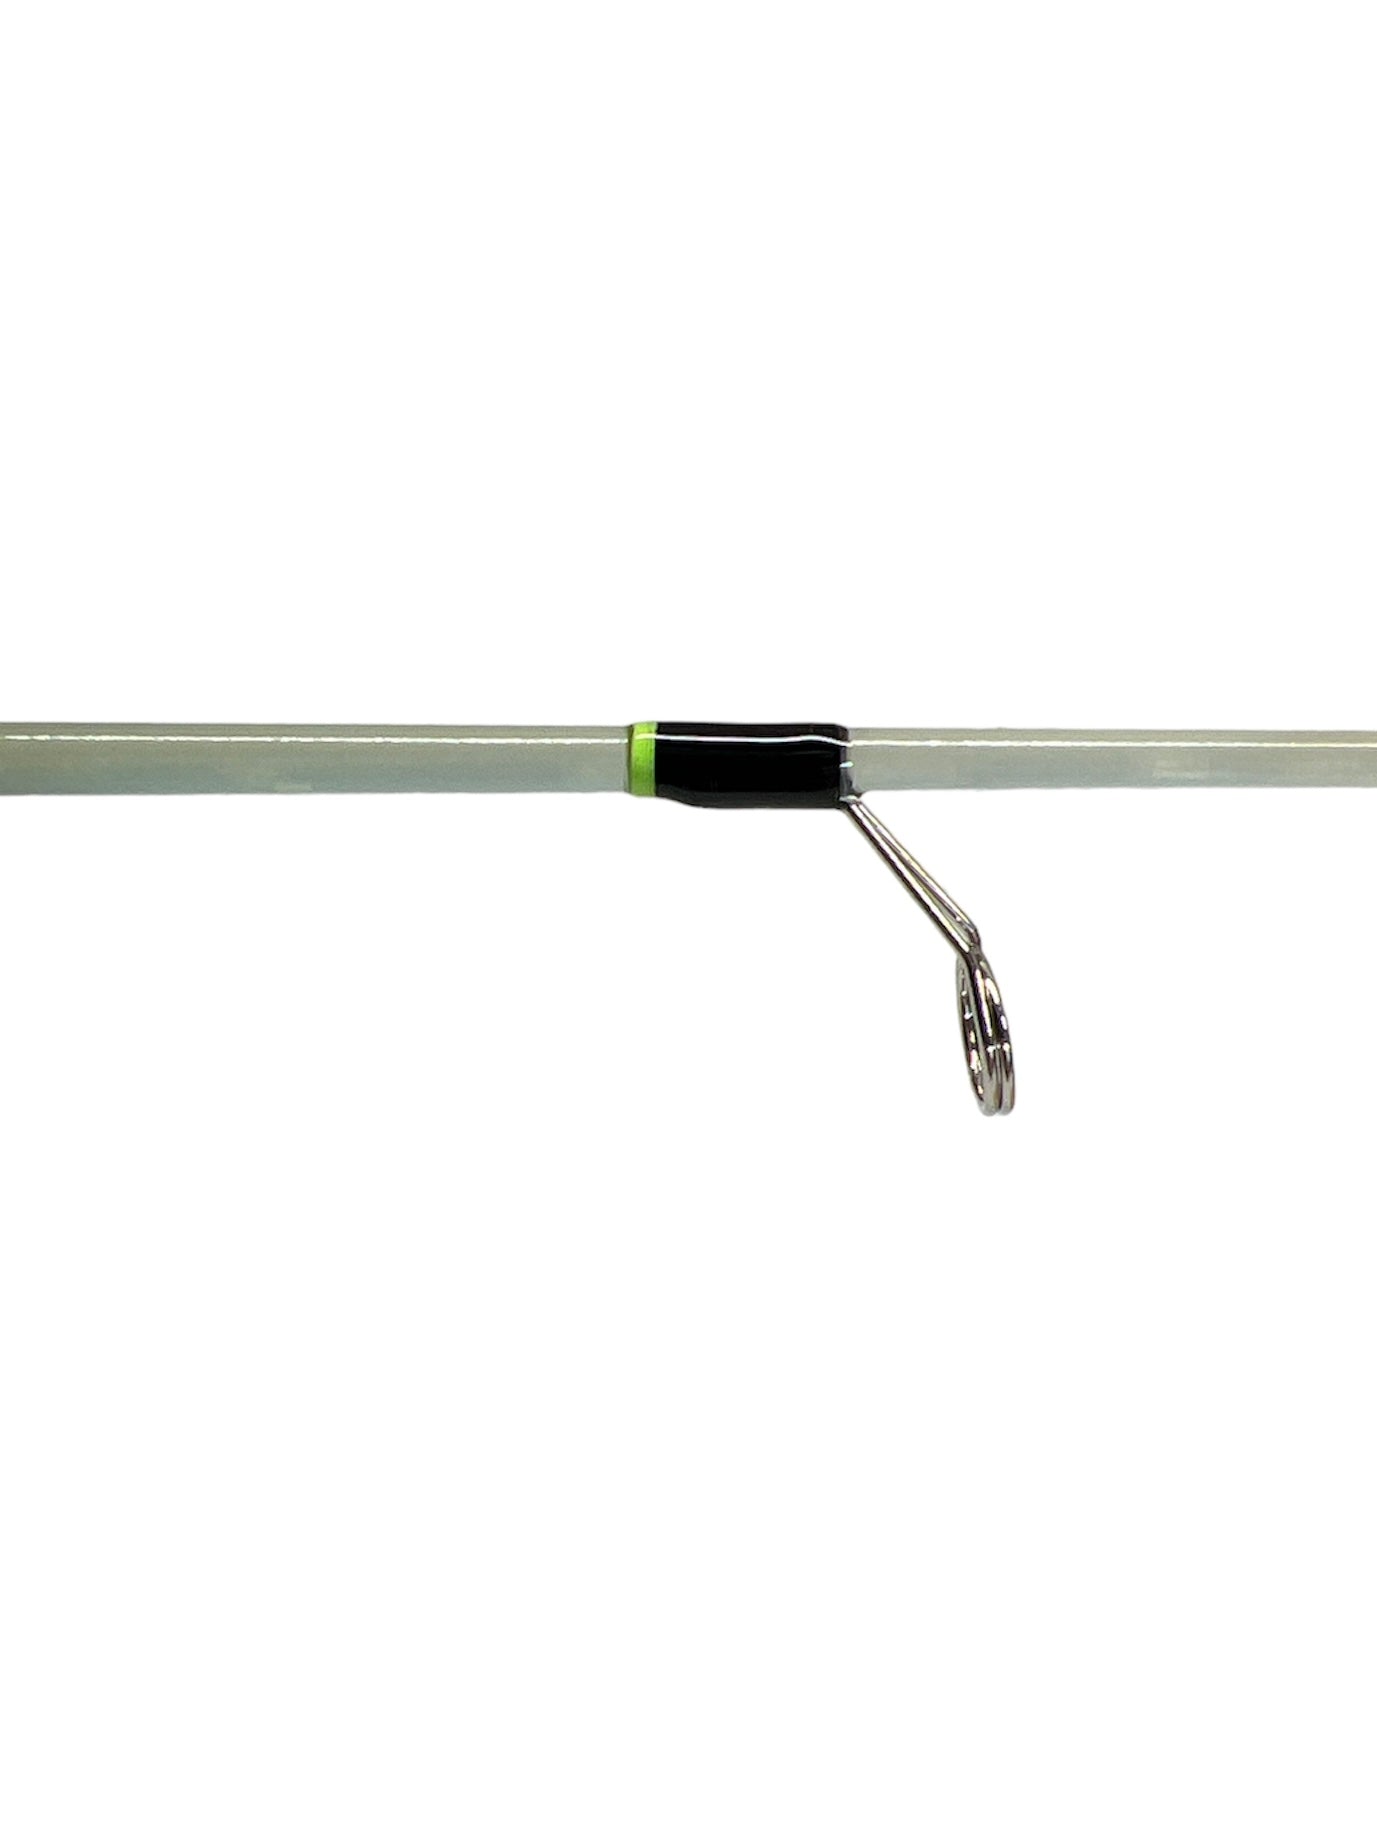 32” Clear Green, White & Black Alpha Noodle